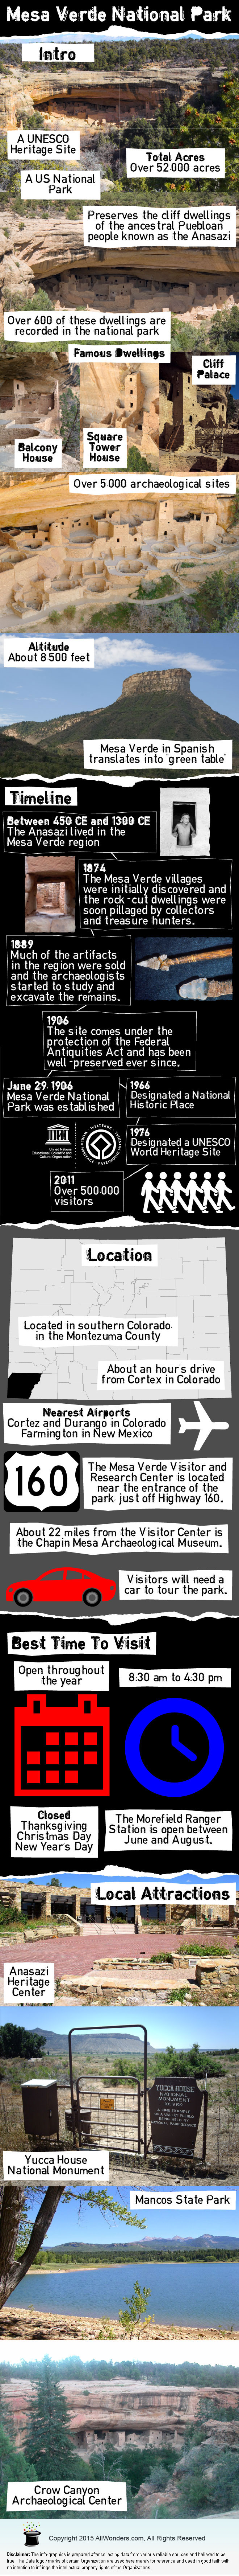 Mesa Verde National Park - Facts & Infographic